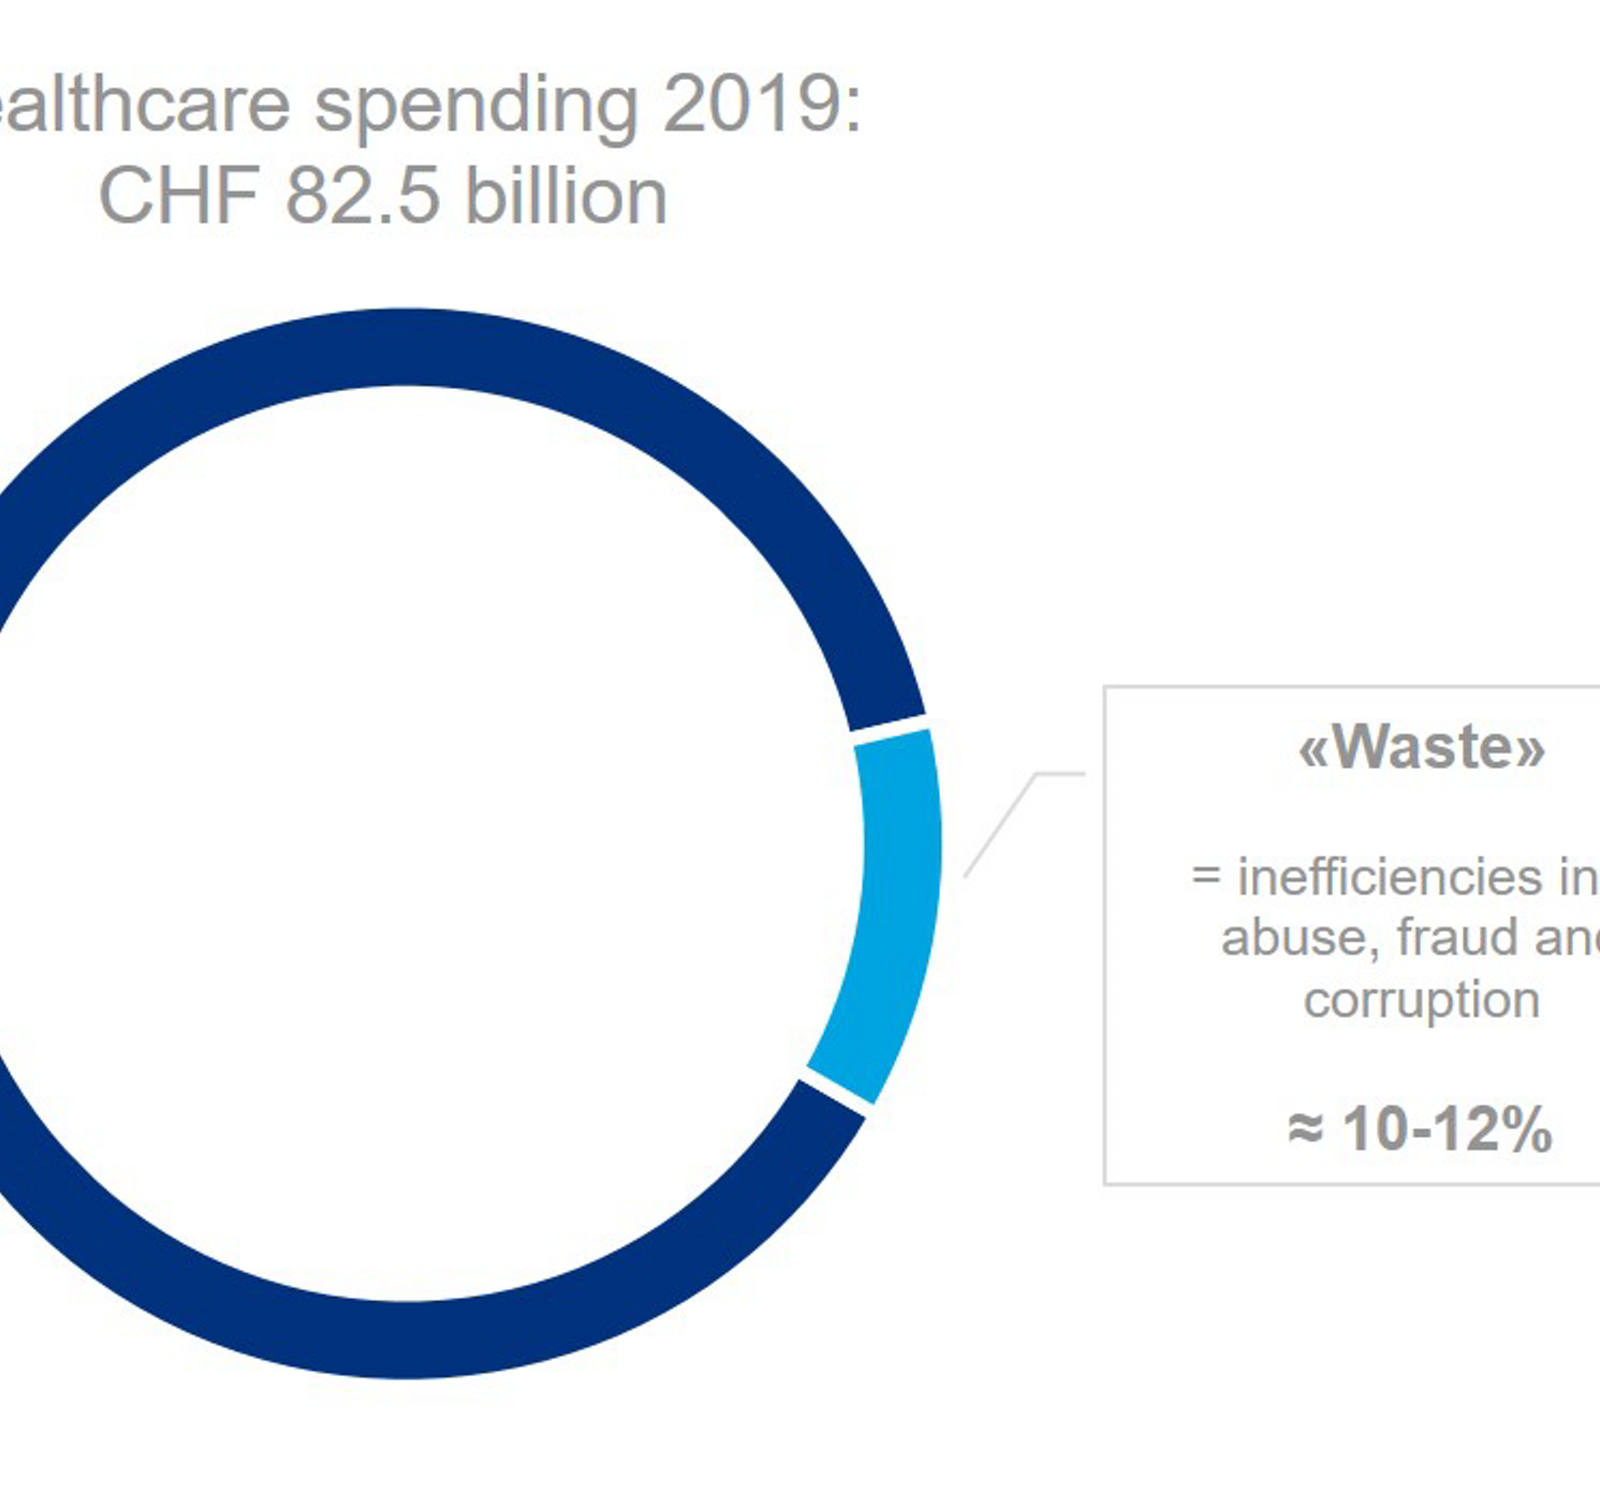 Chart on healthcare expenditure 2019: more than 10% of CHF 82.5 billion is attributable to inefficiency